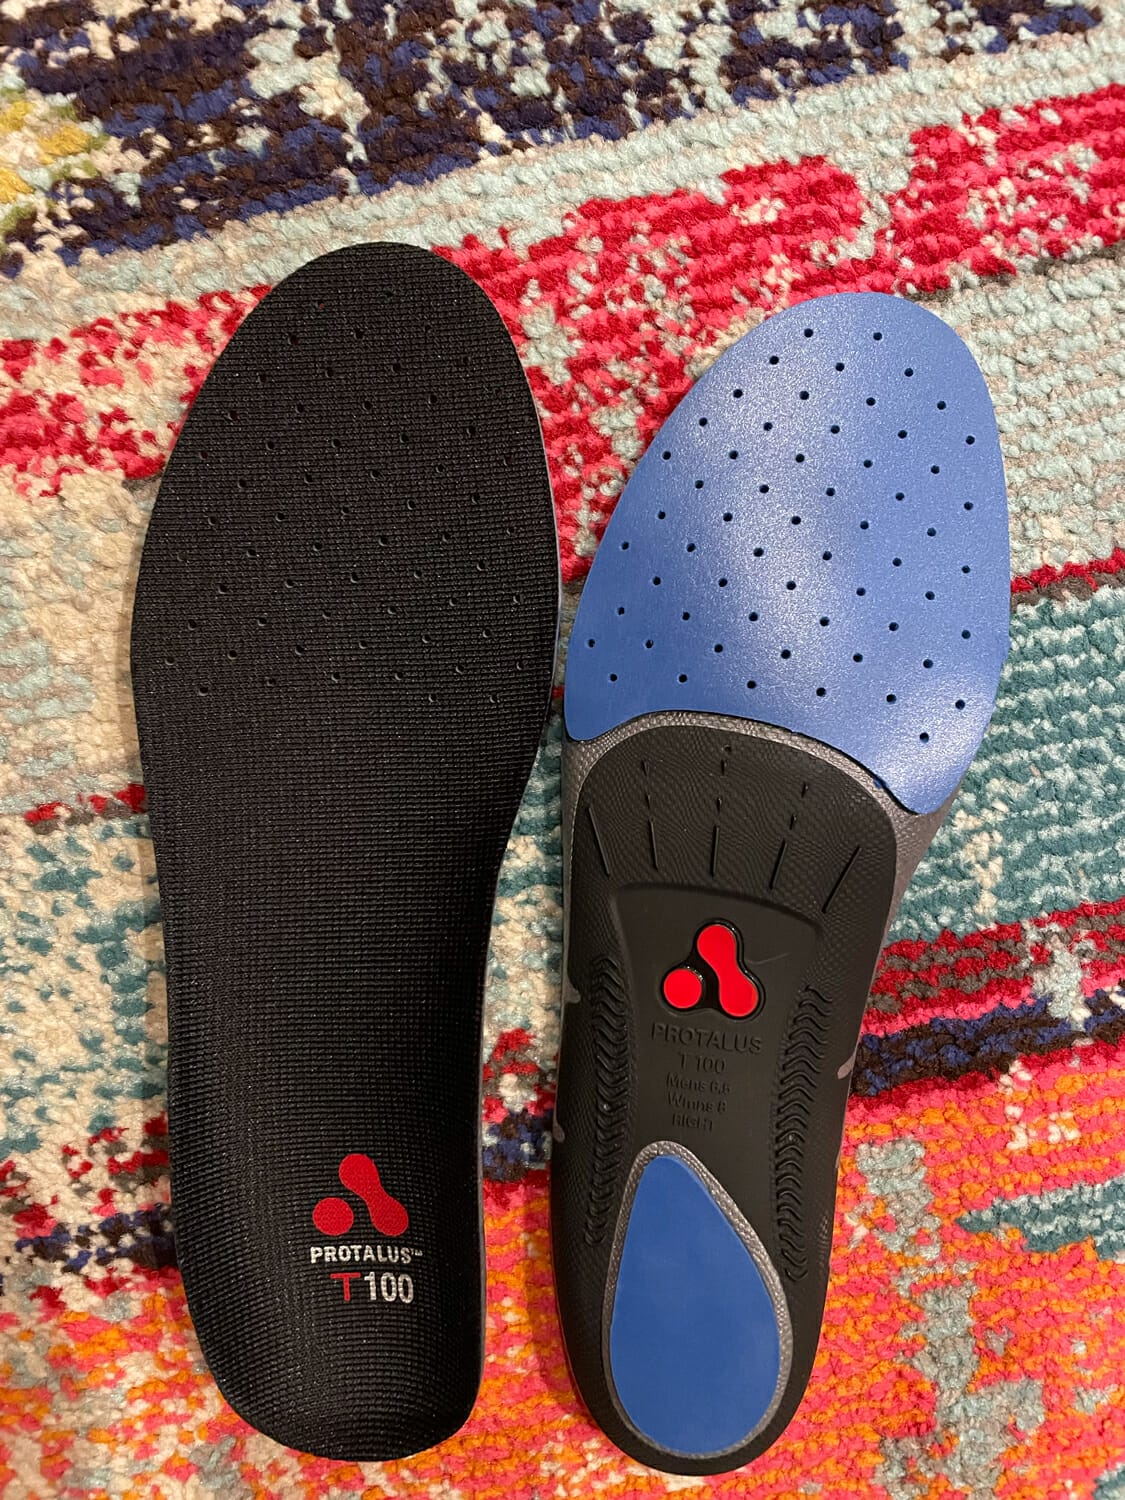 Protalus Insole Review - A Triathlete's Diary